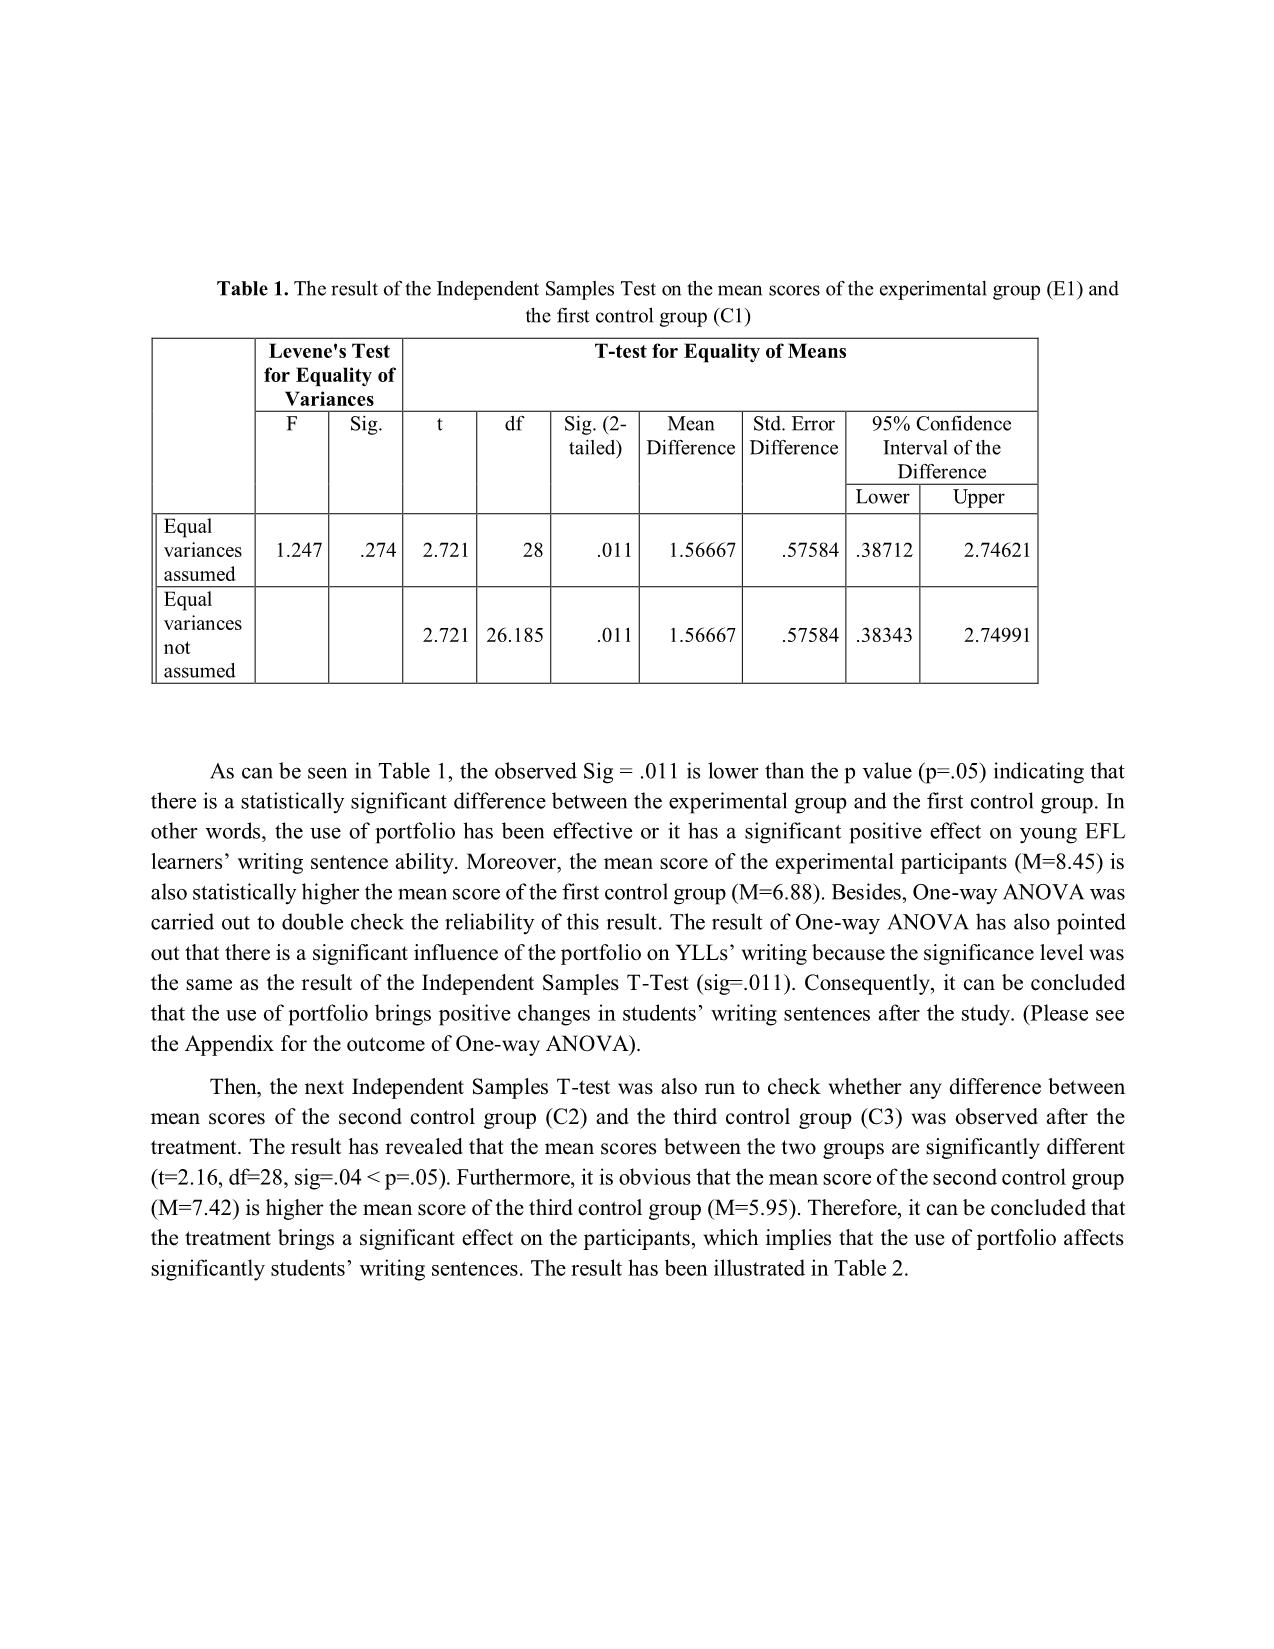 The use of portfolios on efl young learners’ sentence writing: A case at an english language centre in the Mekong delta trang 7